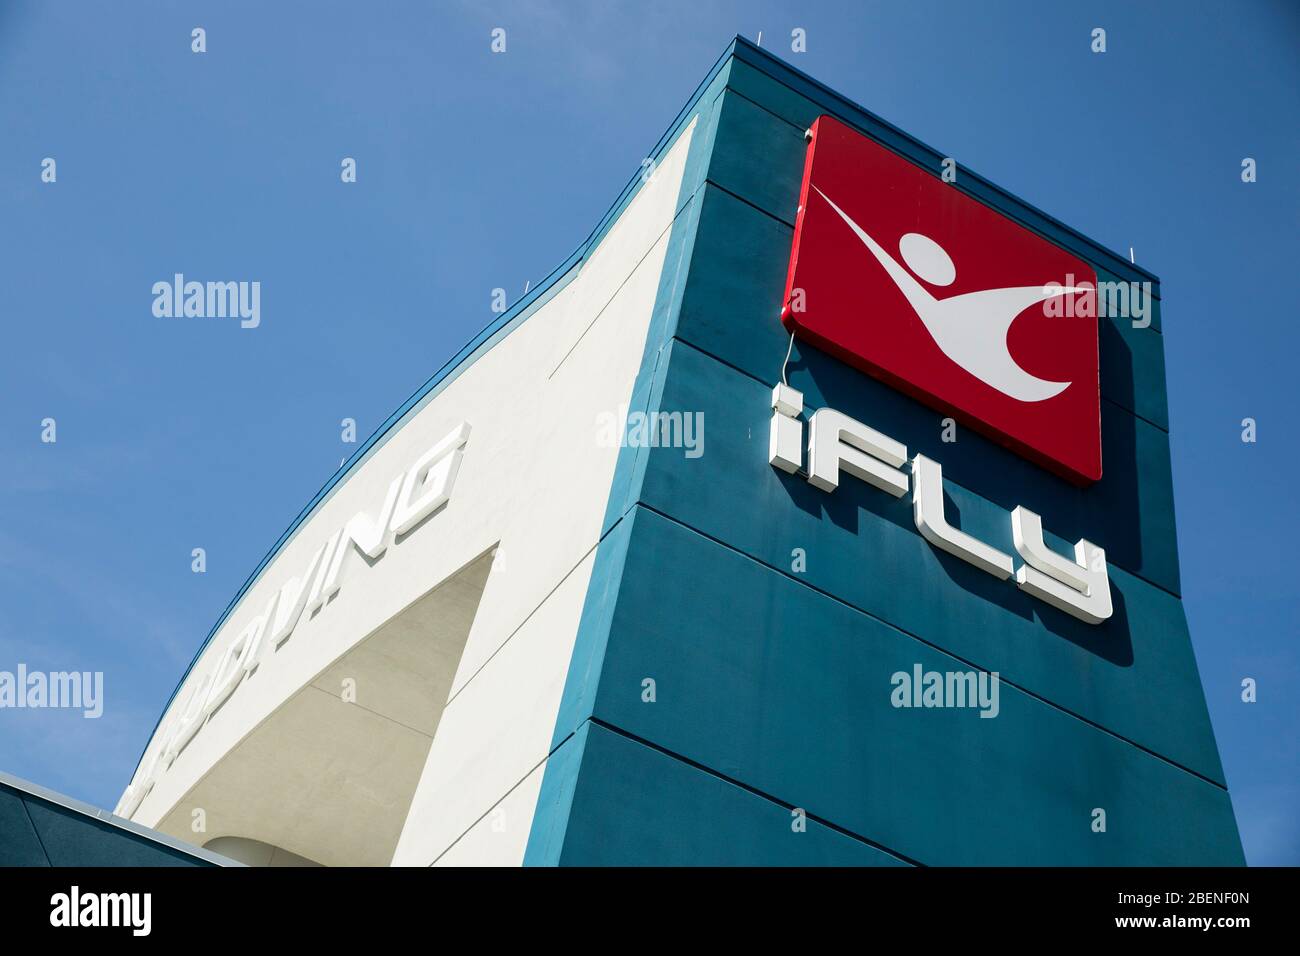 A logo sign outside of a iFly Indoor Skydiving location in Baltimore, Maryland on April 6, 2020. Stock Photo